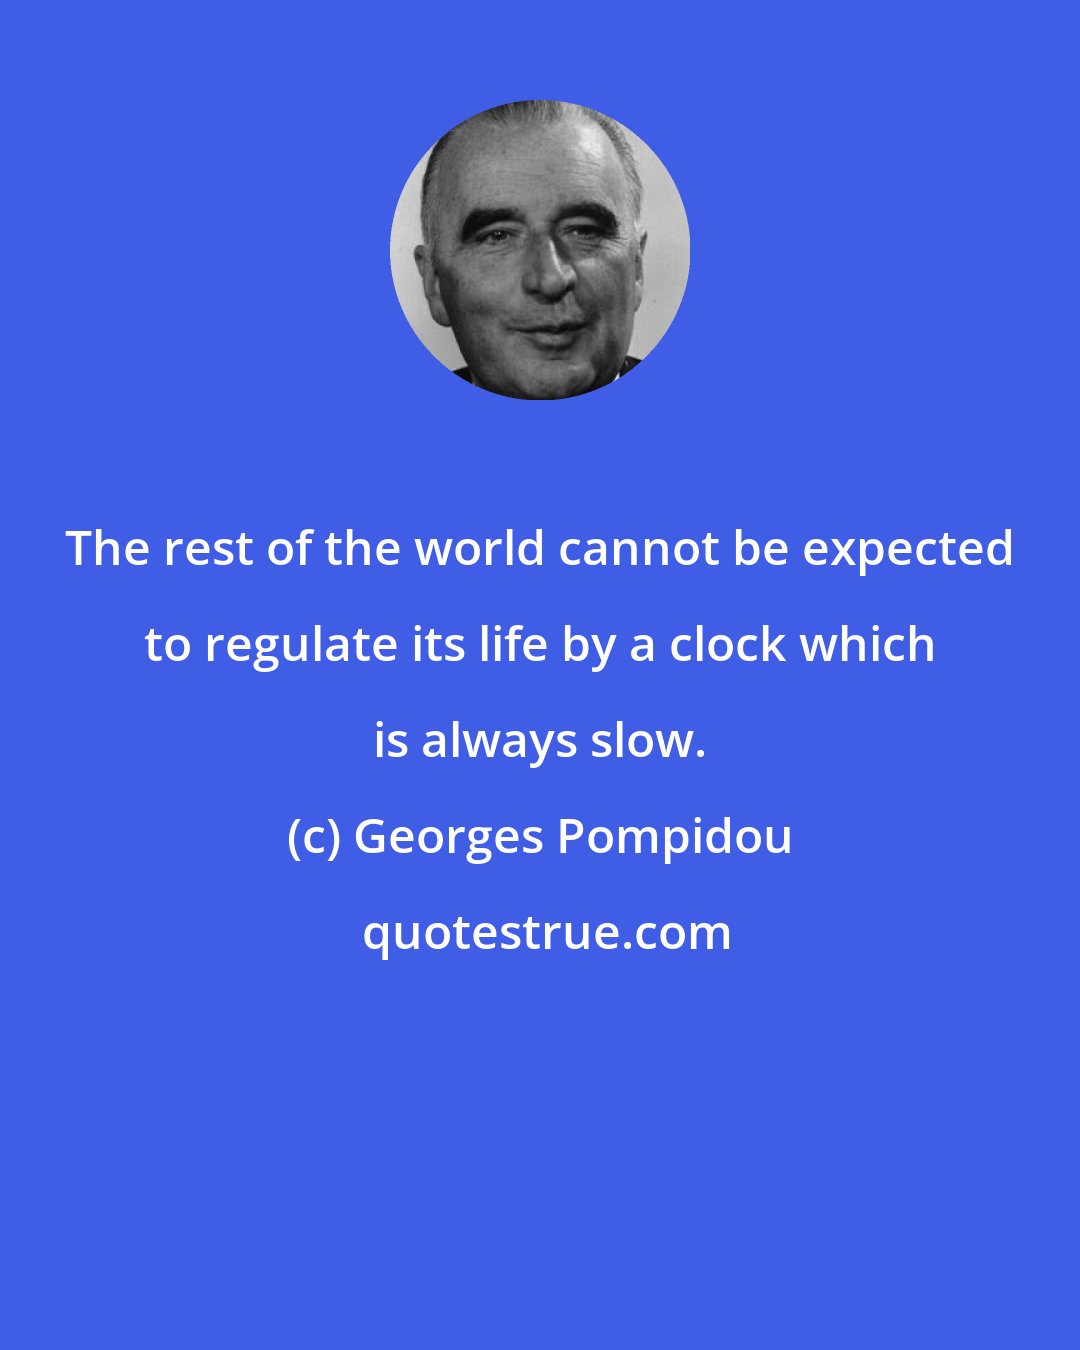 Georges Pompidou: The rest of the world cannot be expected to regulate its life by a clock which is always slow.